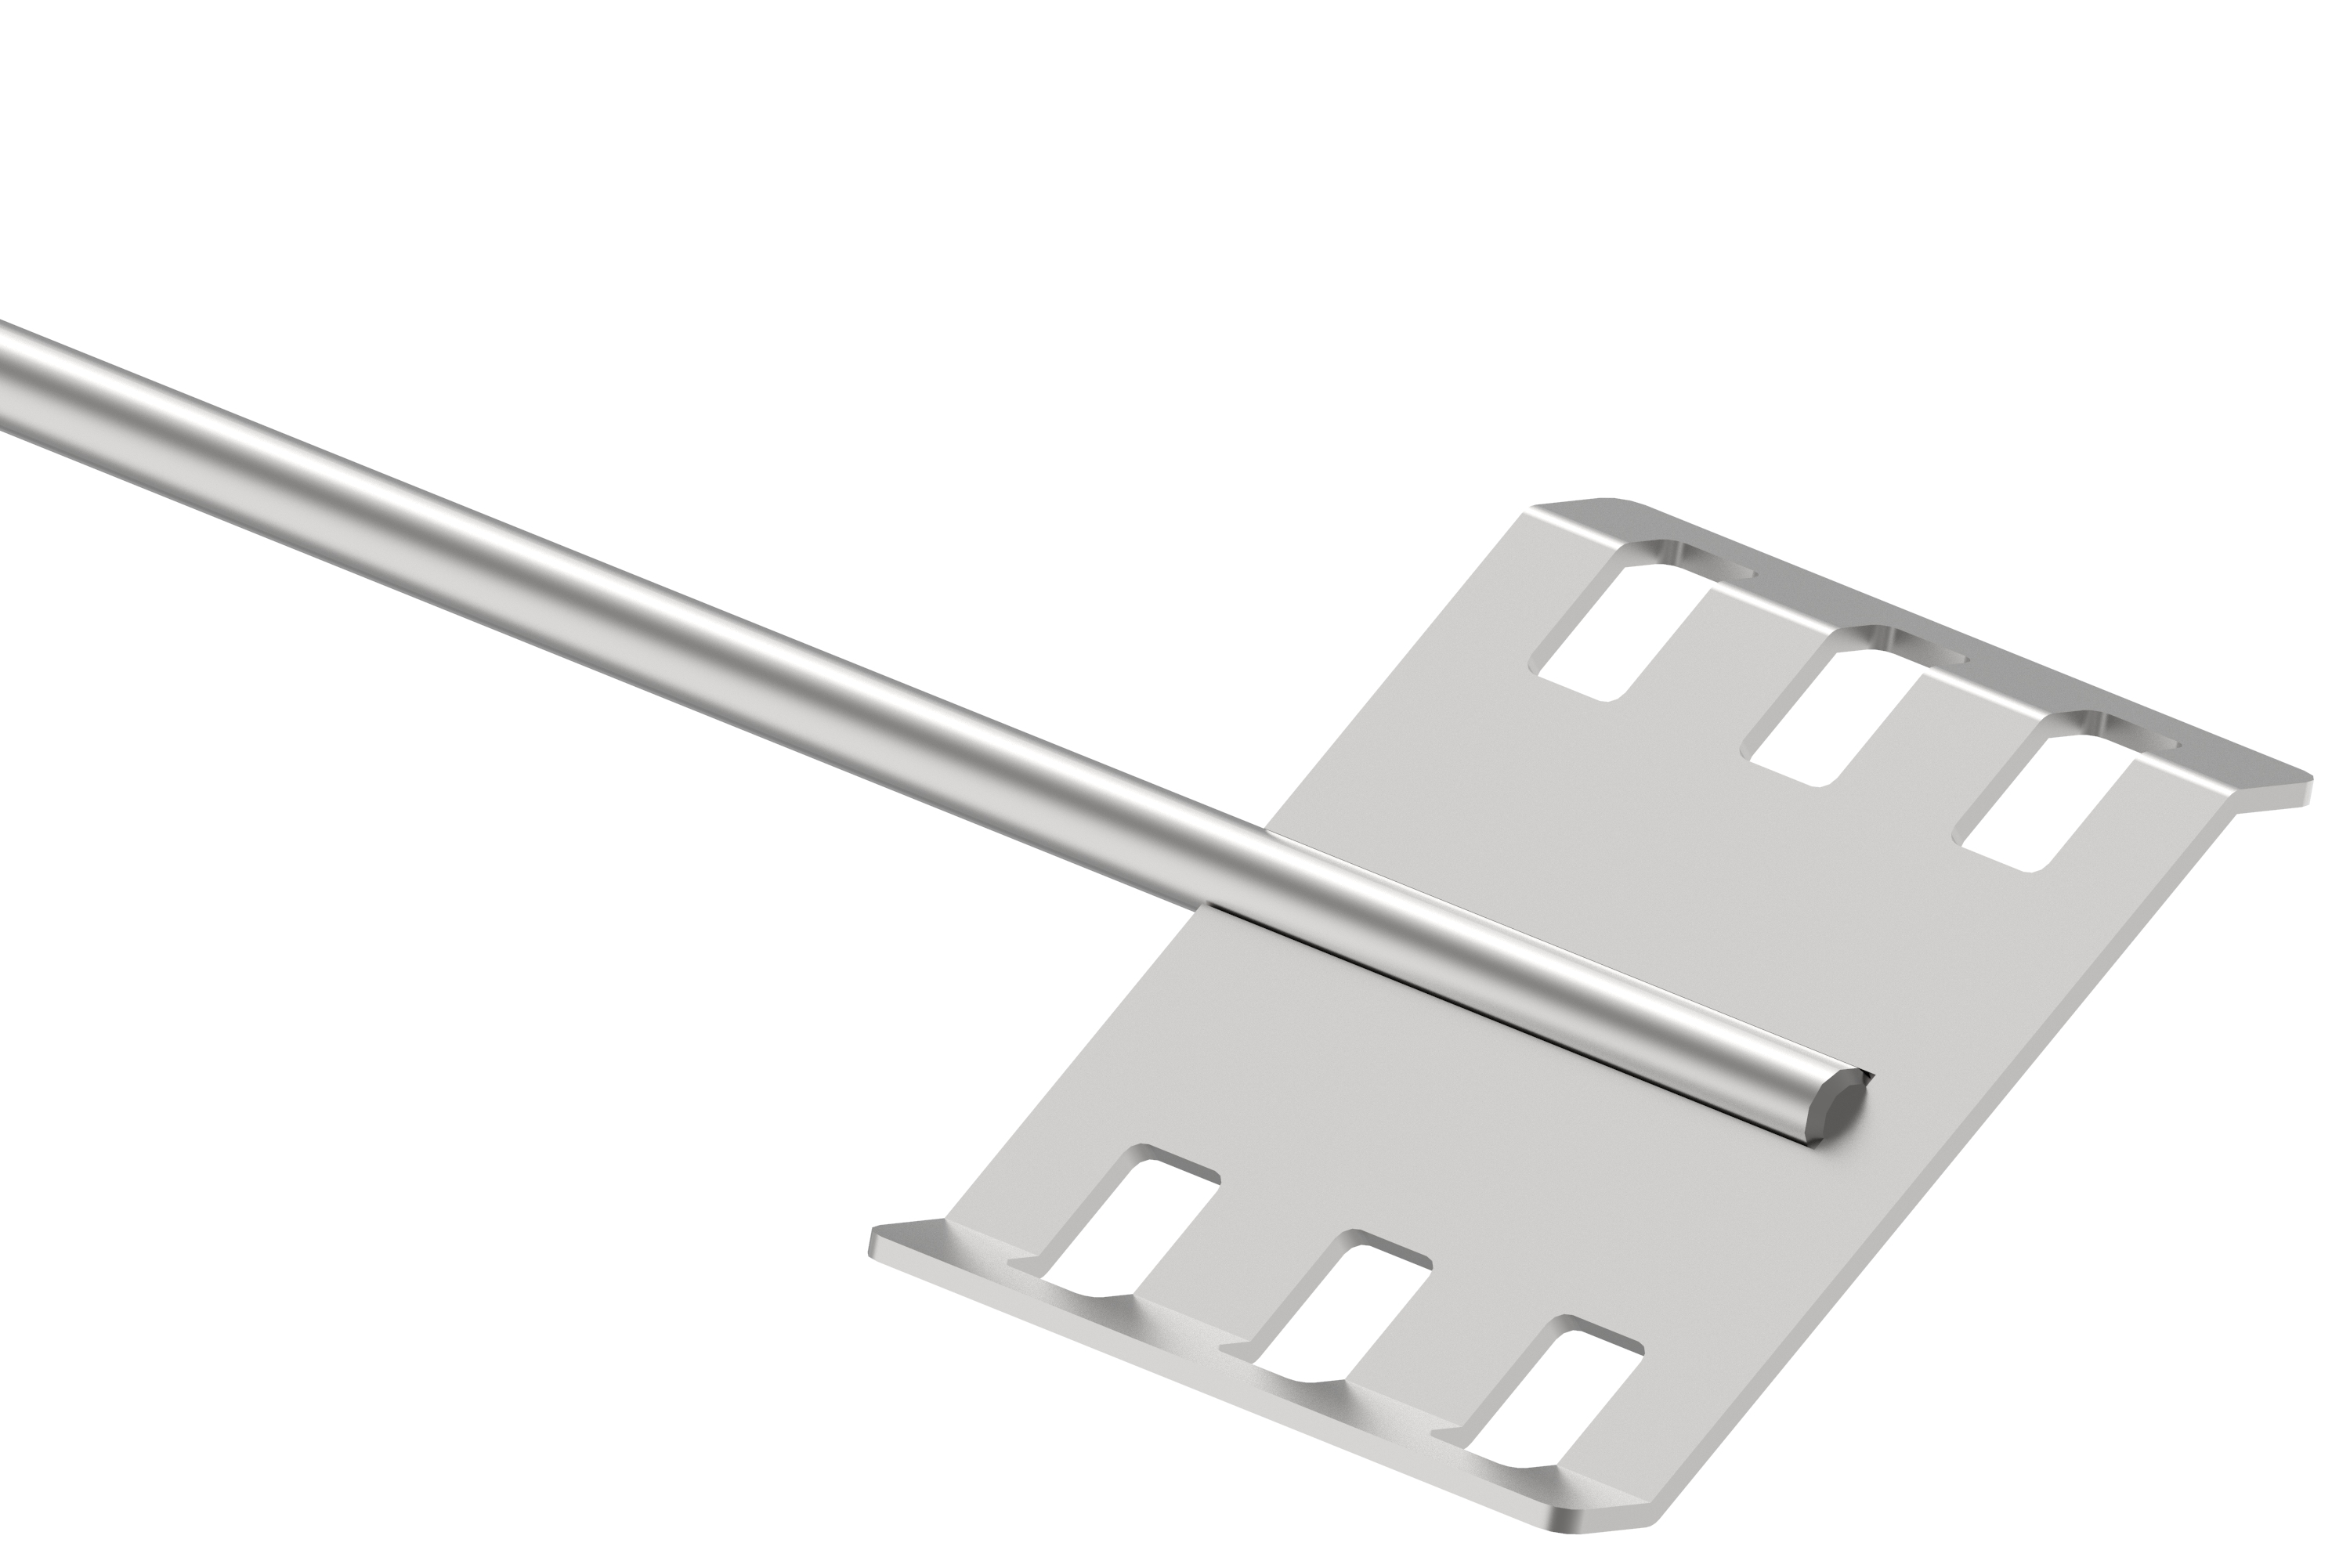 Laboratory square blade stirrer made out of stainless steel